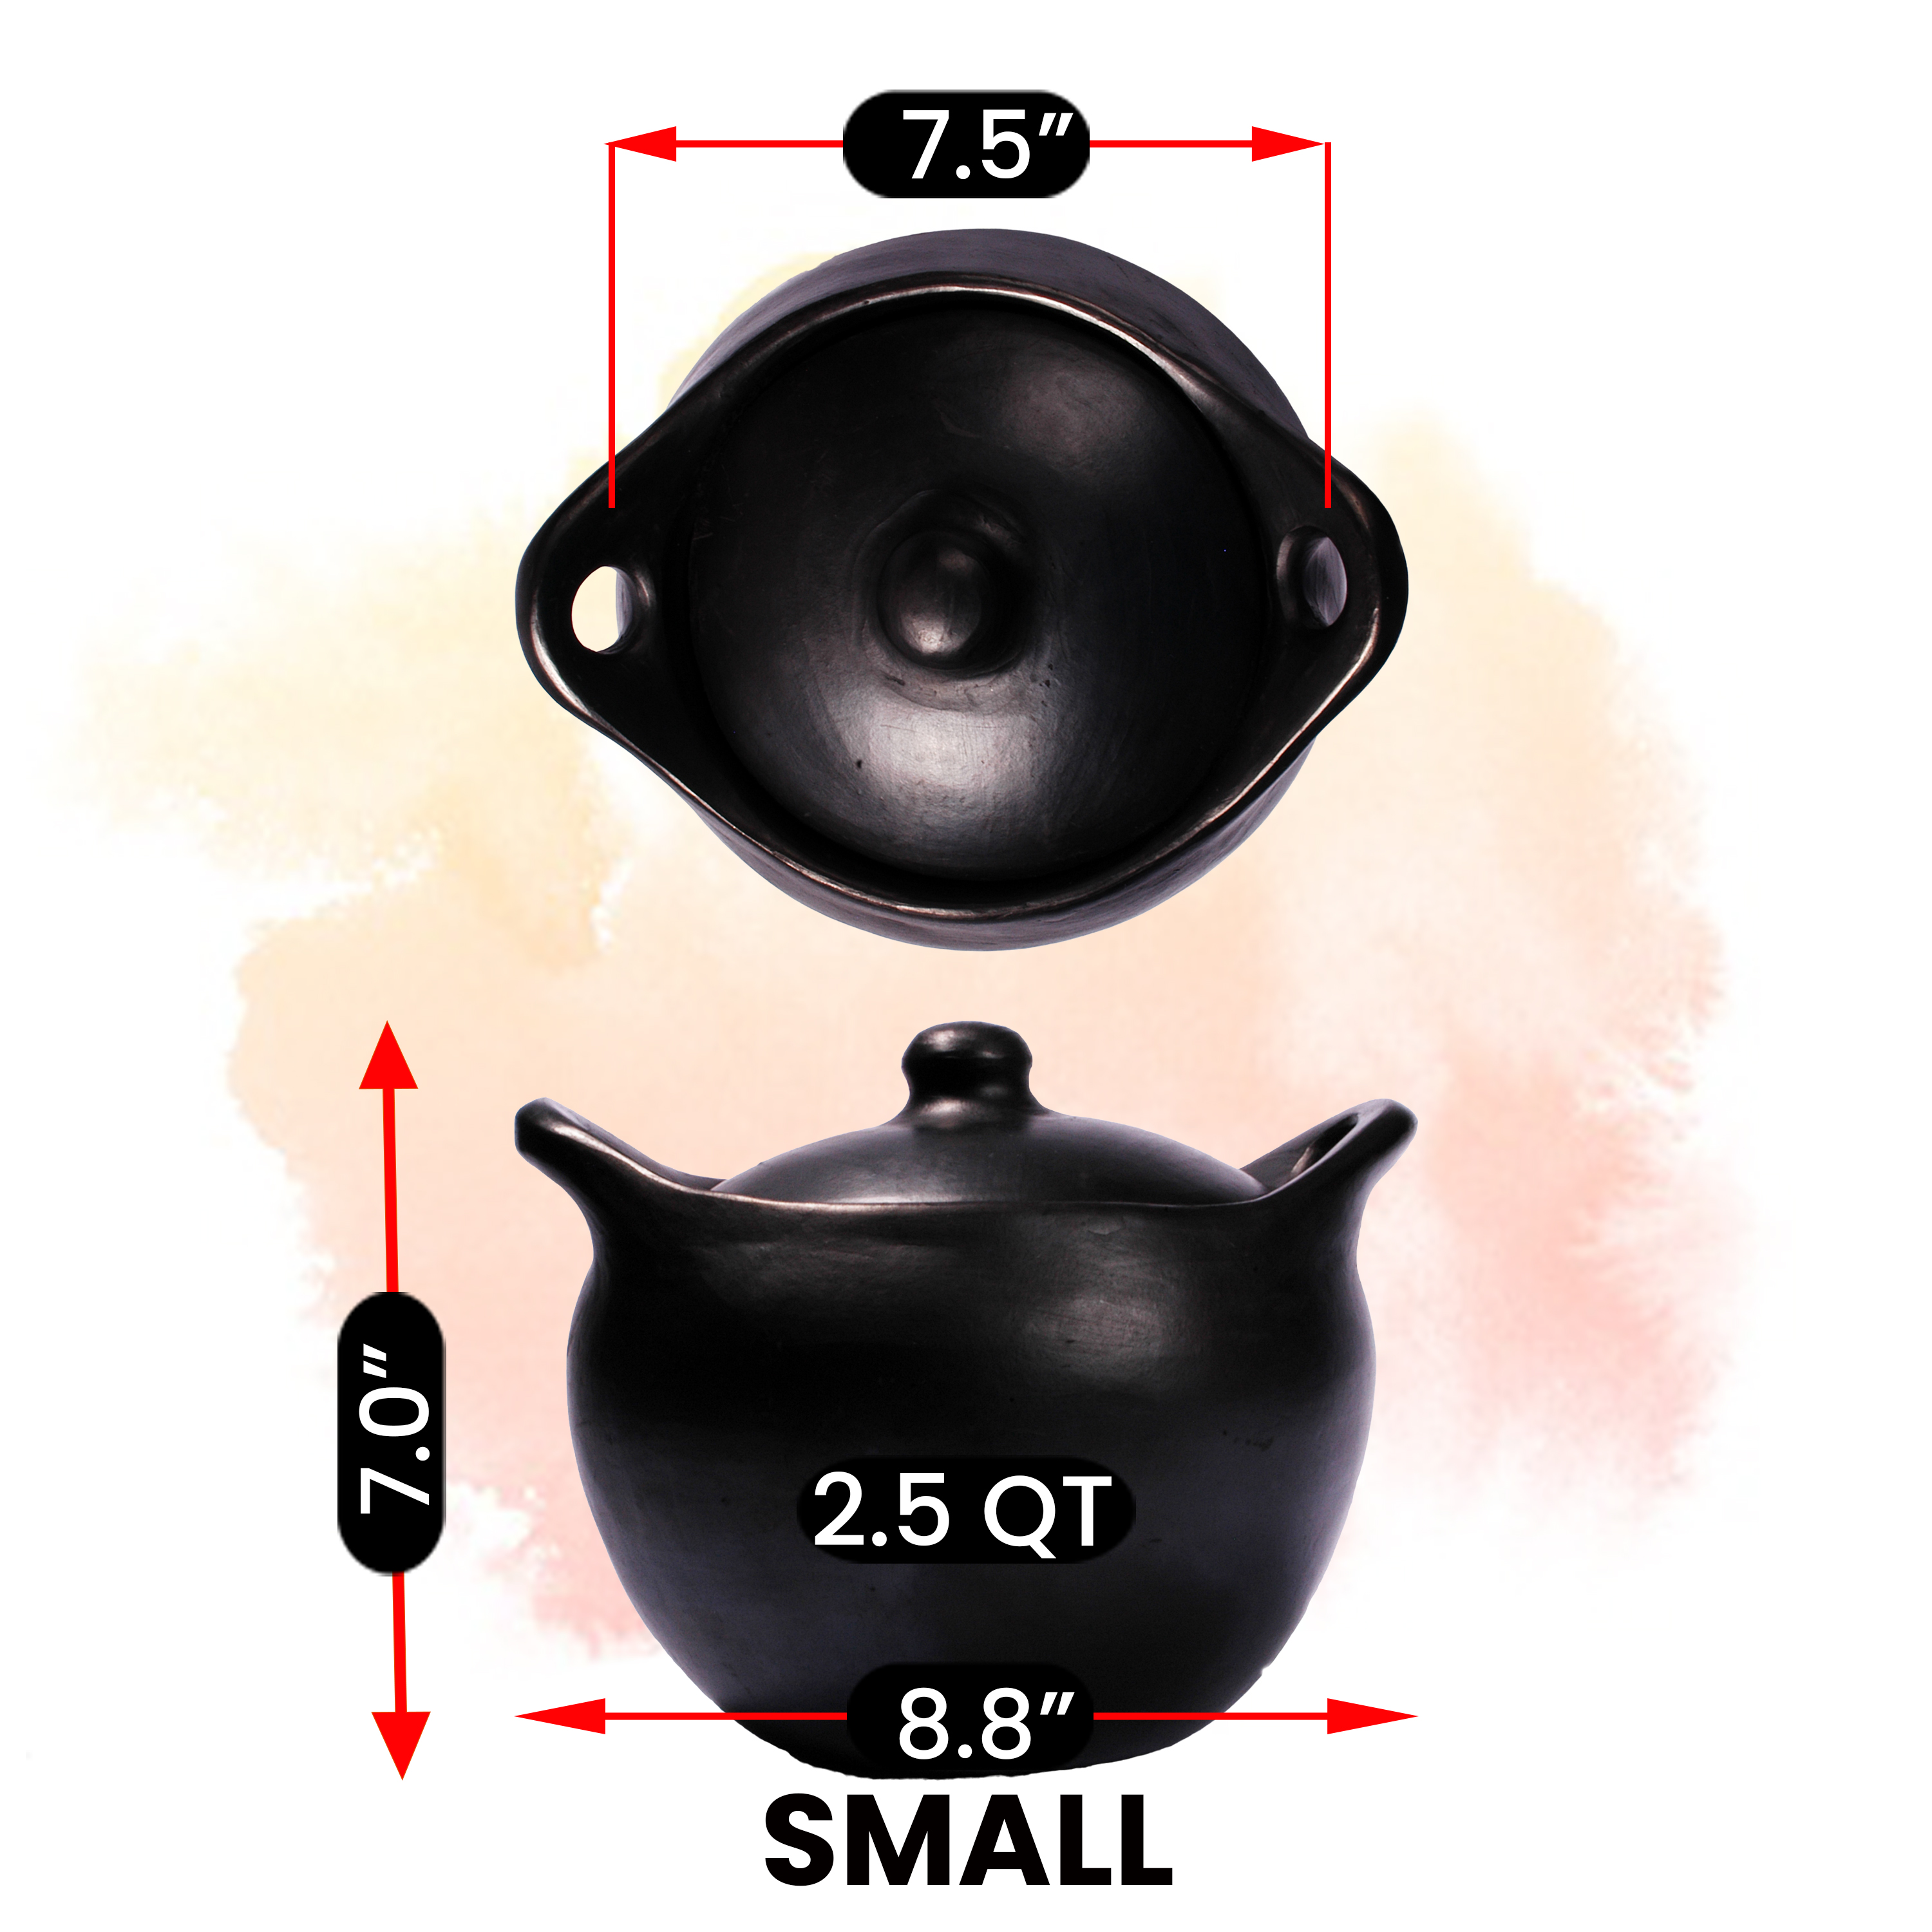 https://ancientcookware.com/images/stories/virtuemart/product/col_1045_09_Large_with_measurements3.jpg